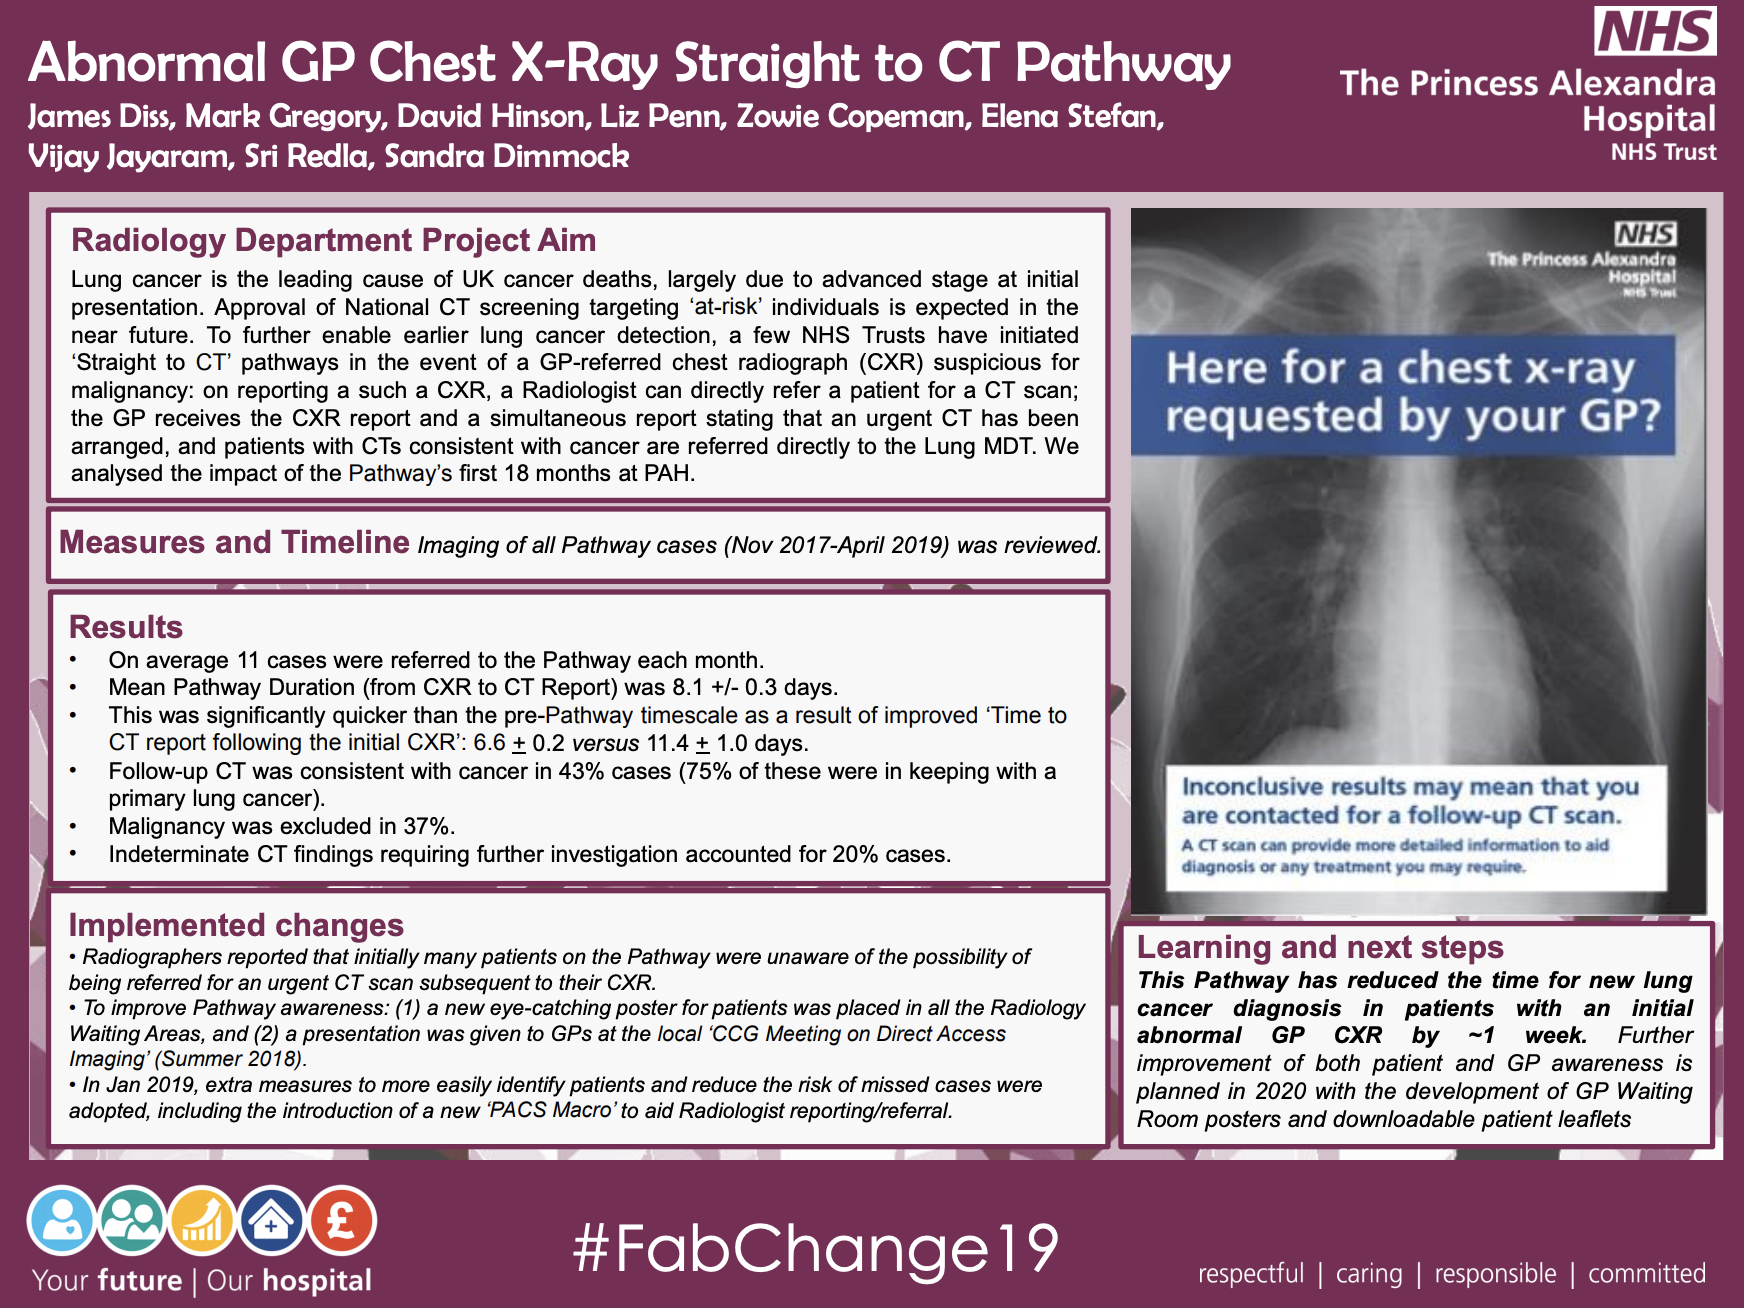 PAHT - Abnormal GP Chest X-Ray straight to CT Pathway - @QualityFirstPAH featured image